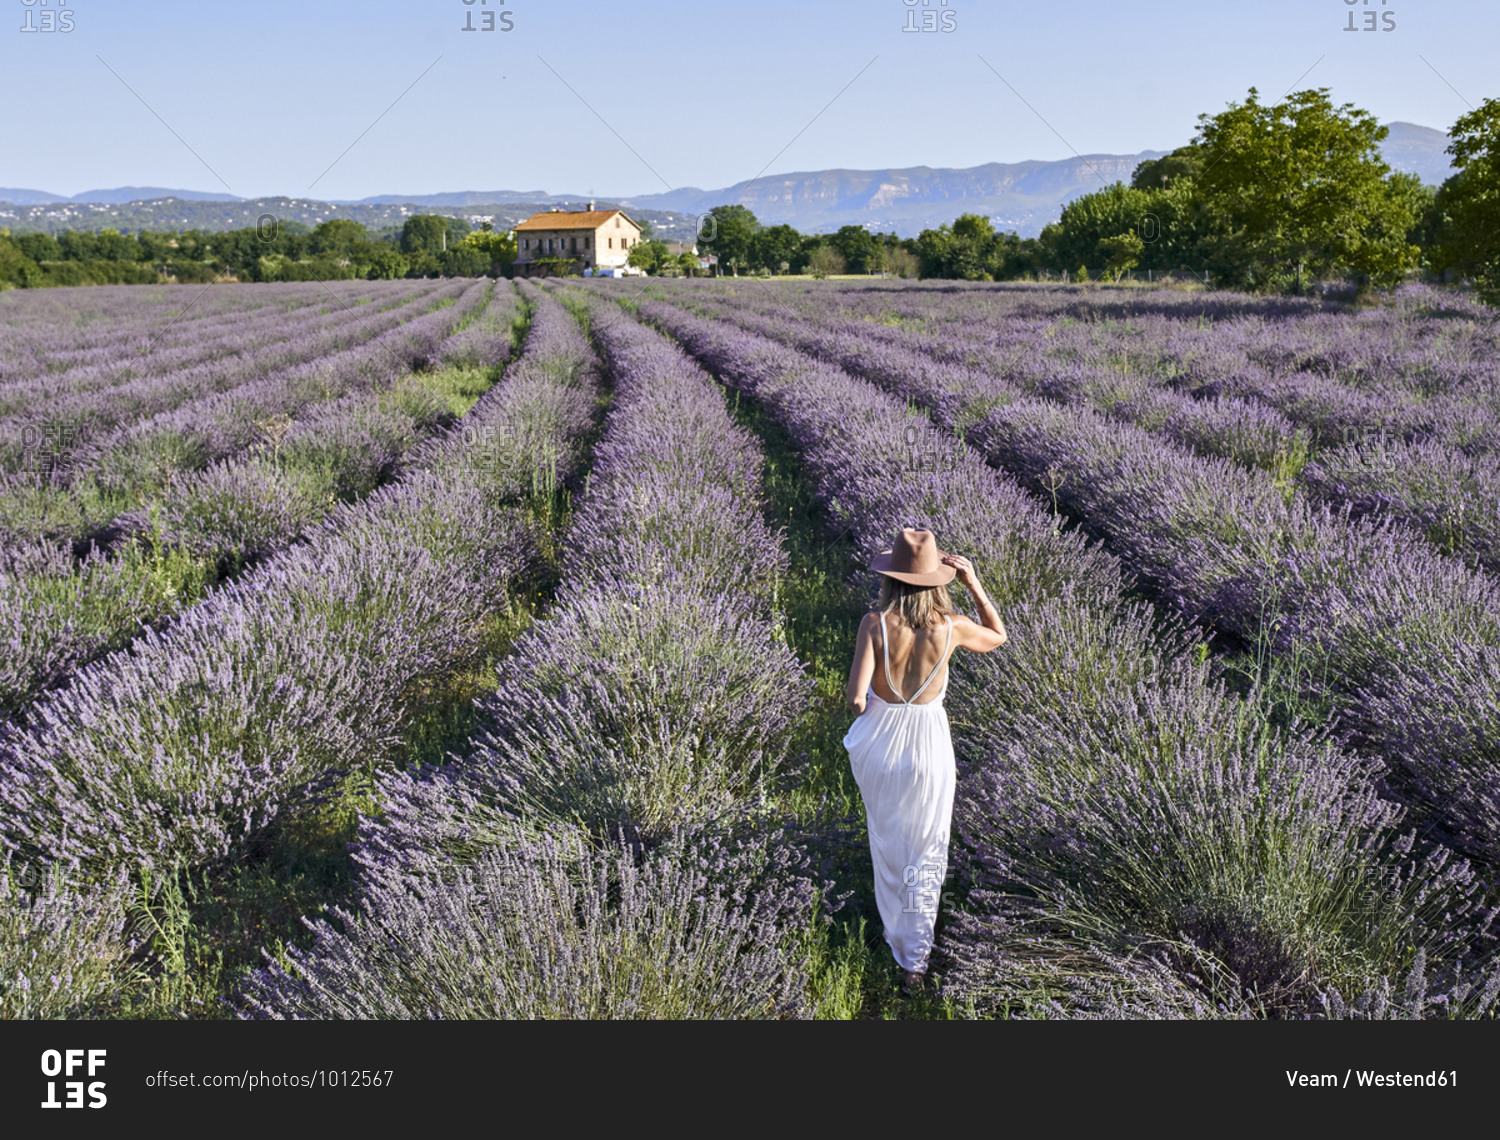 Mid adult woman wearing white dress and hat walking amidst lavender field